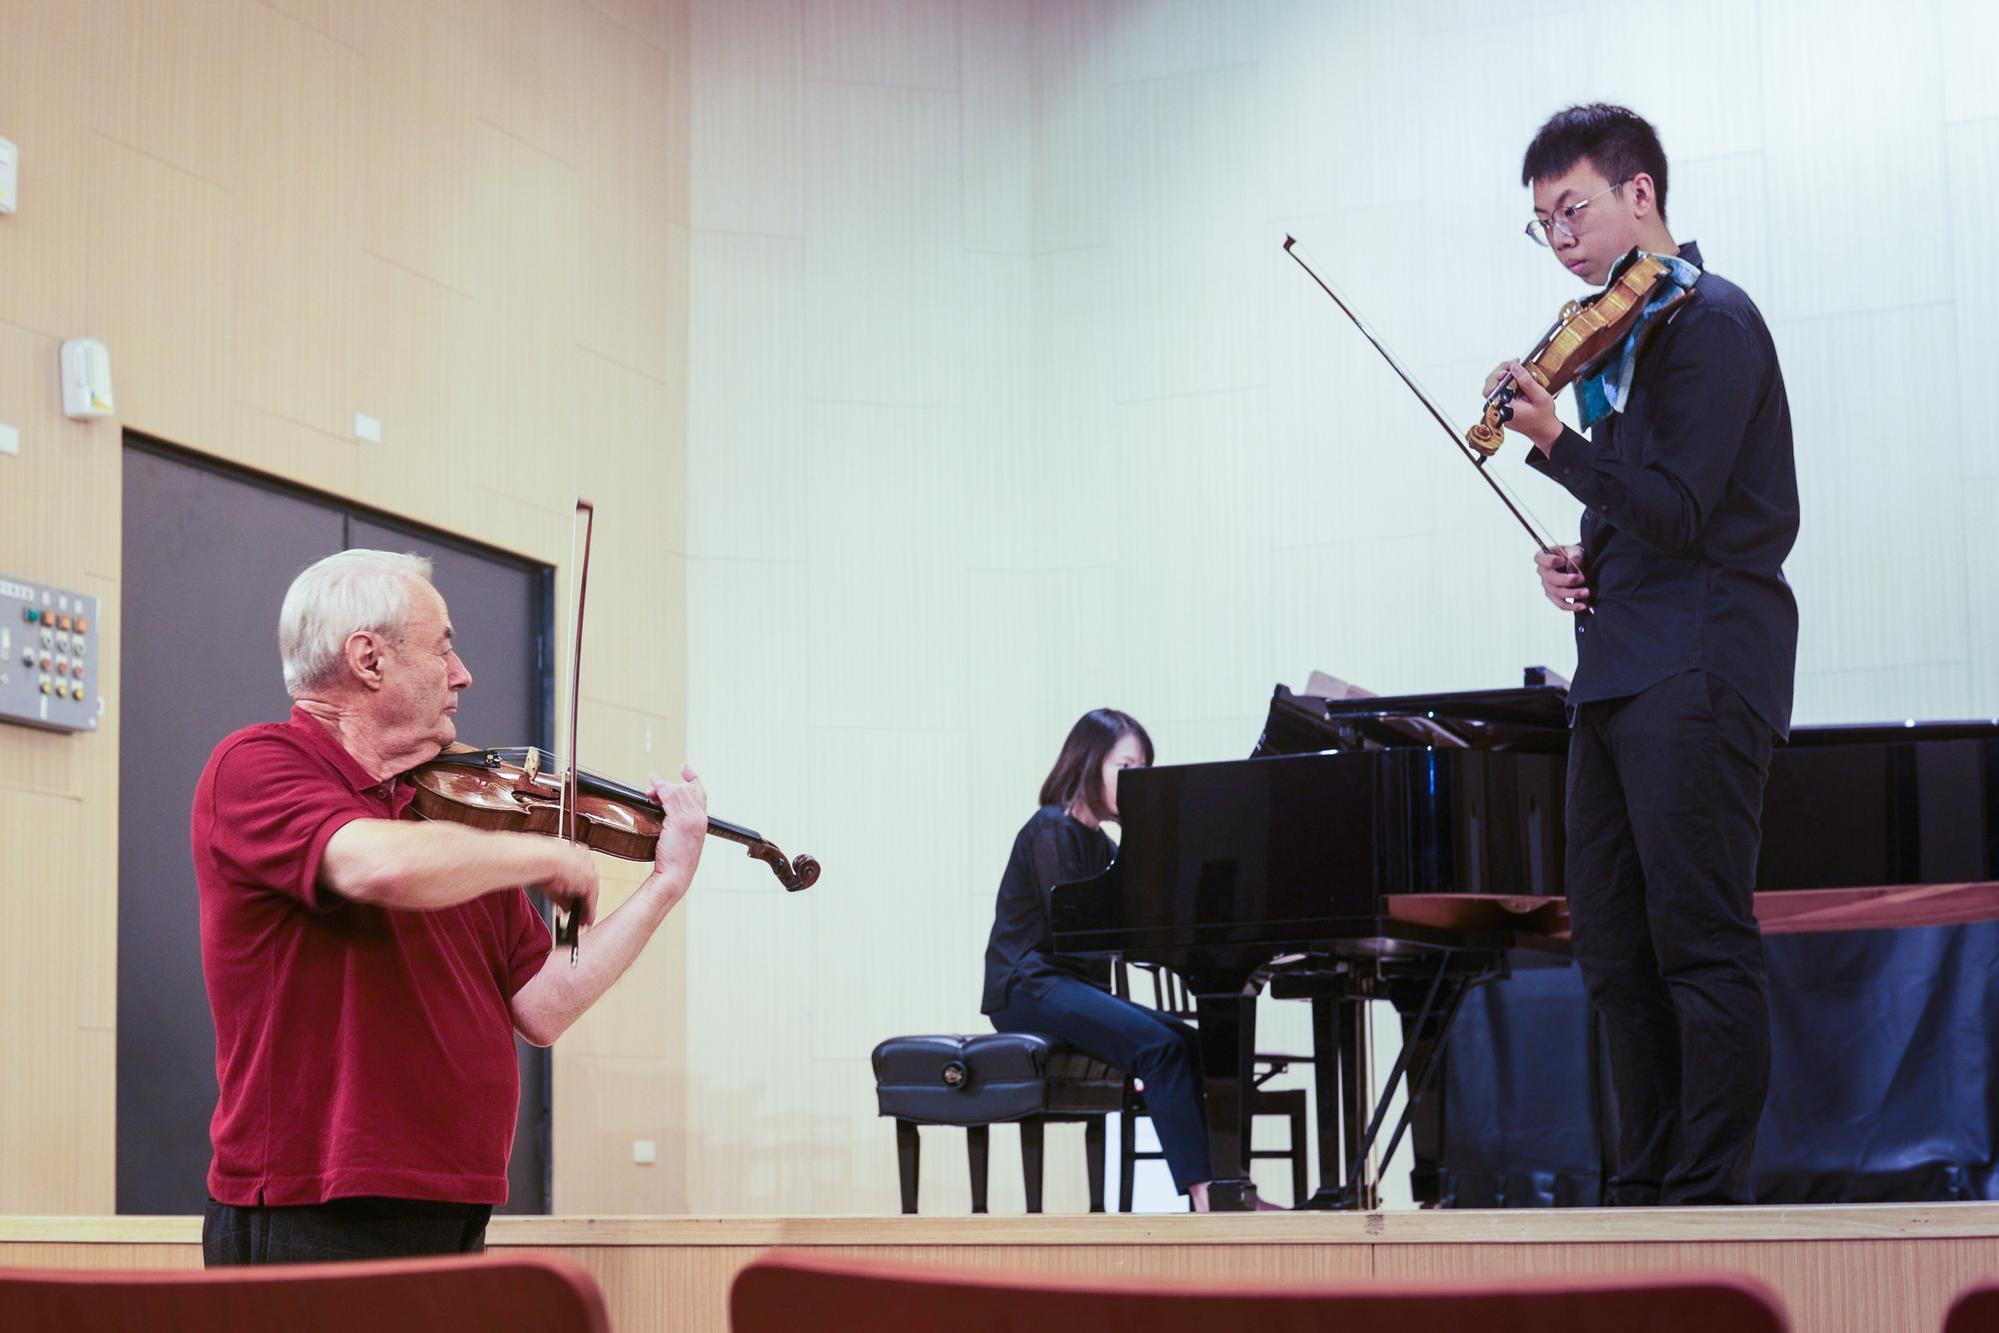 French virtuoso violinist Gérard Poulet (left) visited NTHU last year to mentor students.